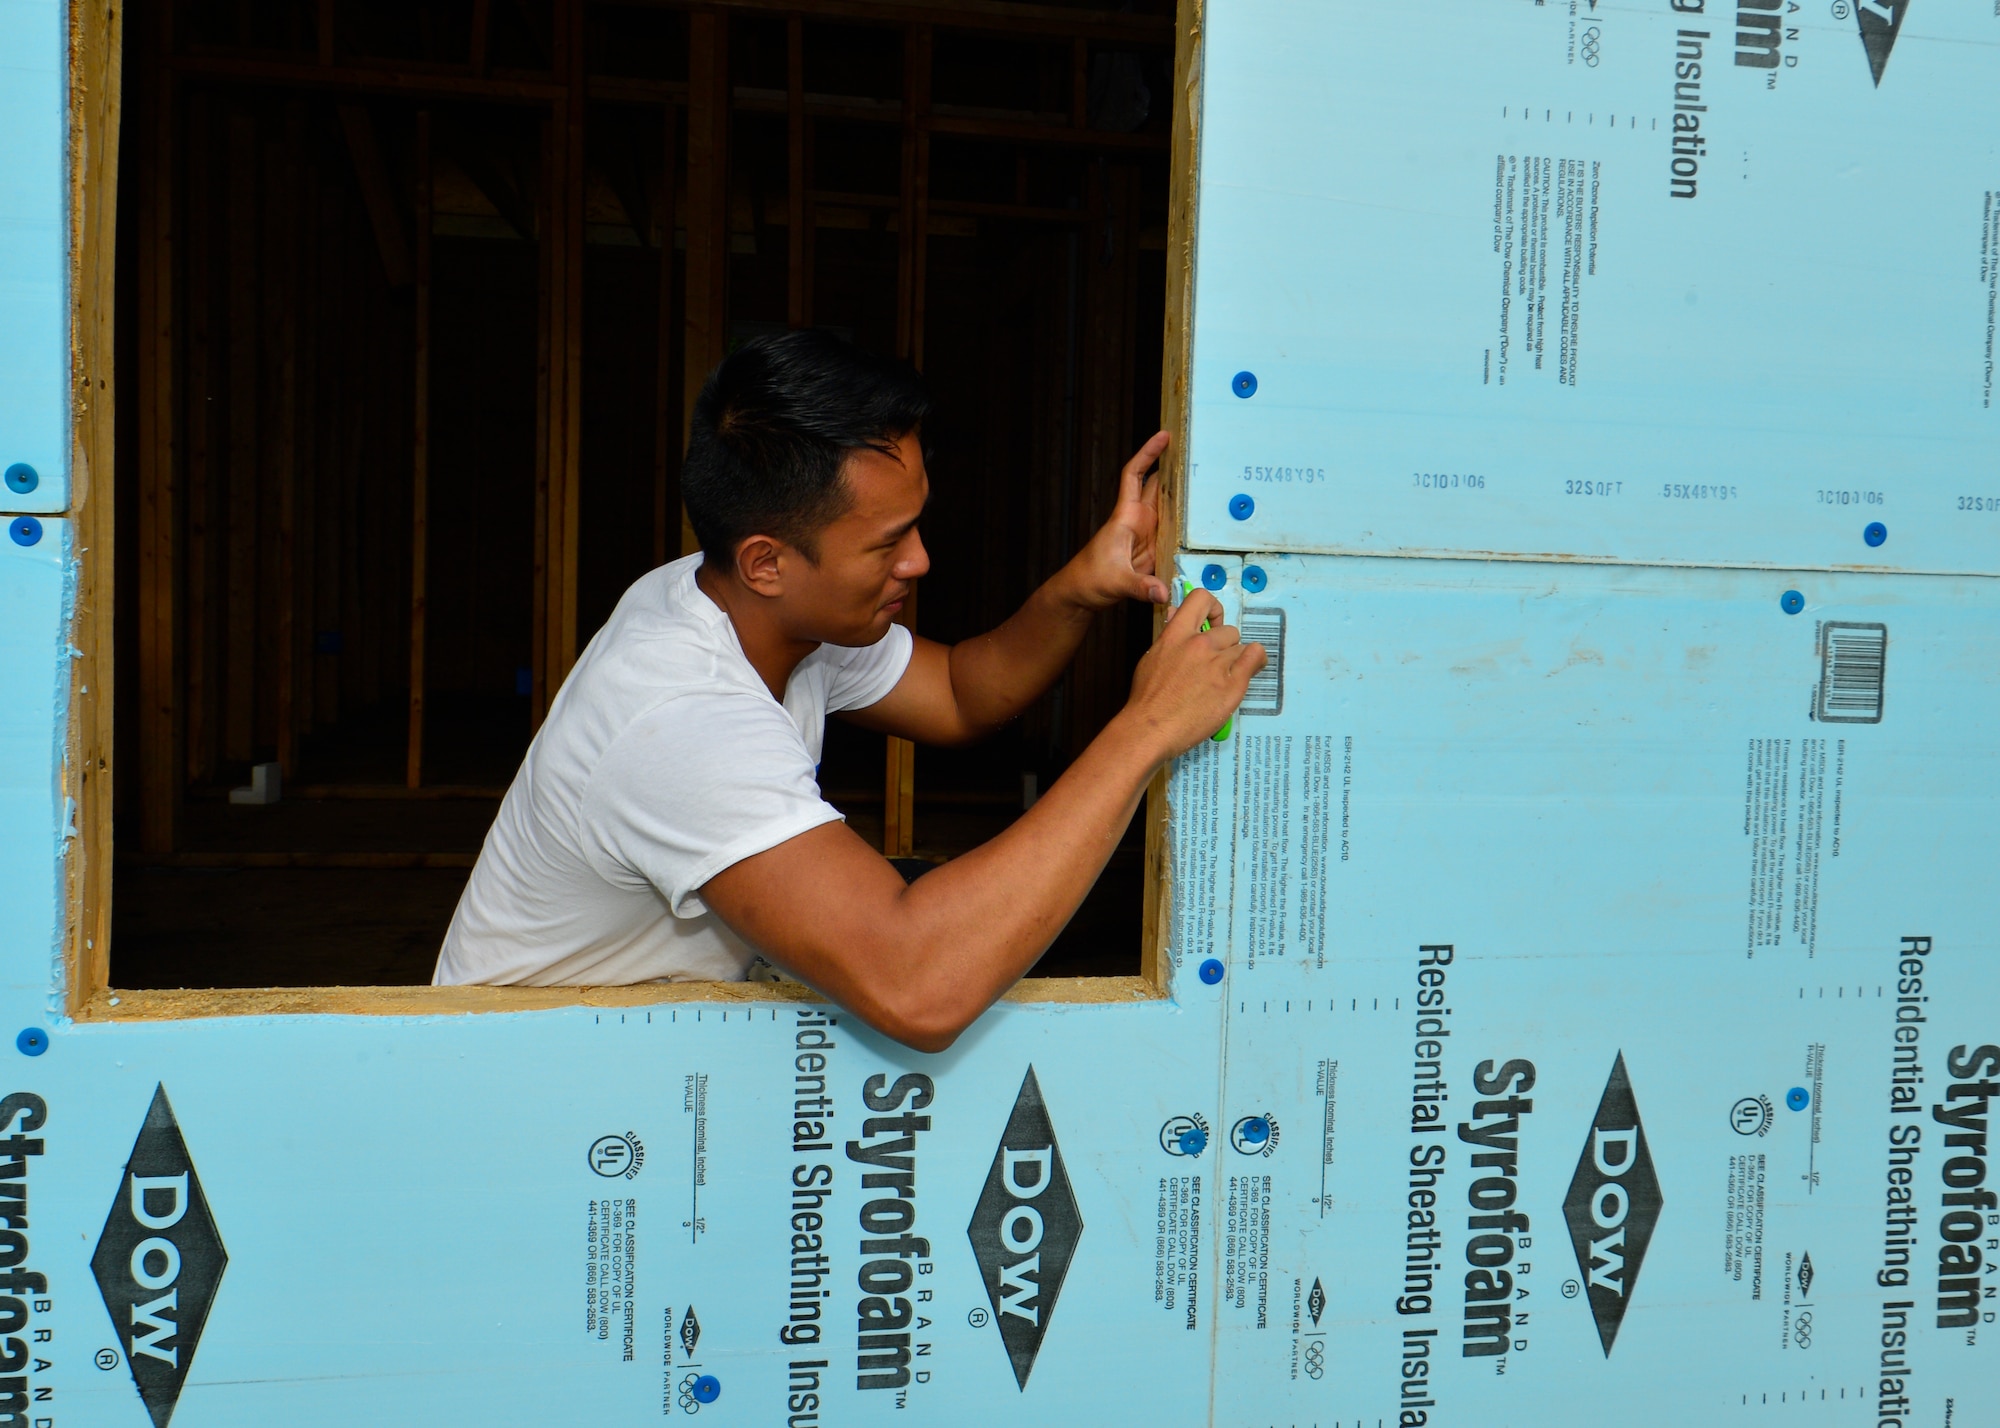 Senior Airman Poler Oliveros, 436th Operations Support Squadron aircrew flight equipment, cuts residential sheathing insulation around a window opening with an utility knife July 12, 2014, at a Habitat for Humanity construction site in Frederica, Del. Oliveros, a Frederica resident, was one of 20 Team Dover Airmen to volunteer. (U.S. Air Force photo/Airman 1st Class Zachary Cacicia)